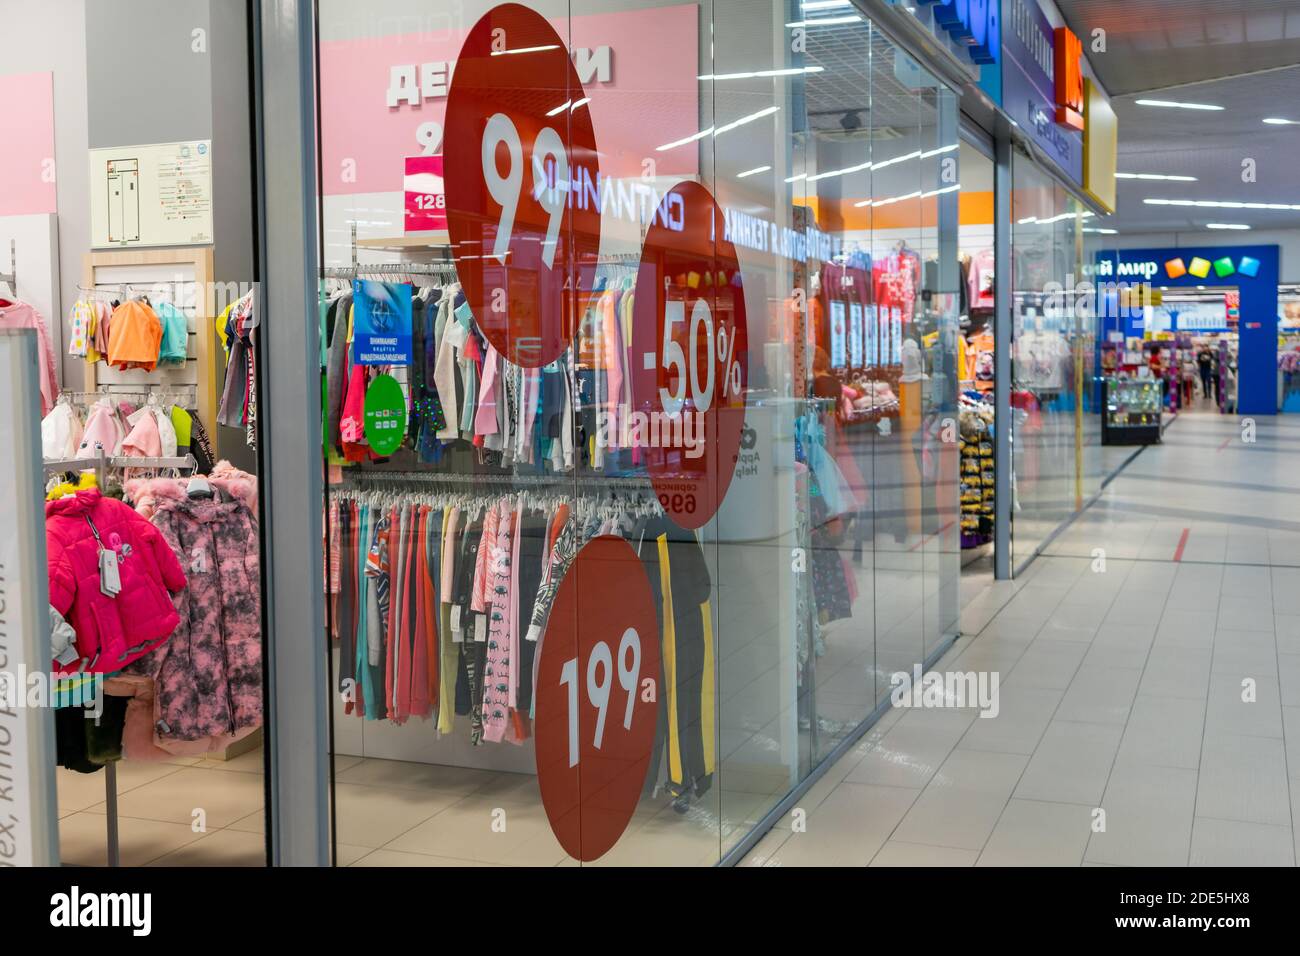 sale 30, 99, 199, on the window of a childrens clothing store Stock Photo